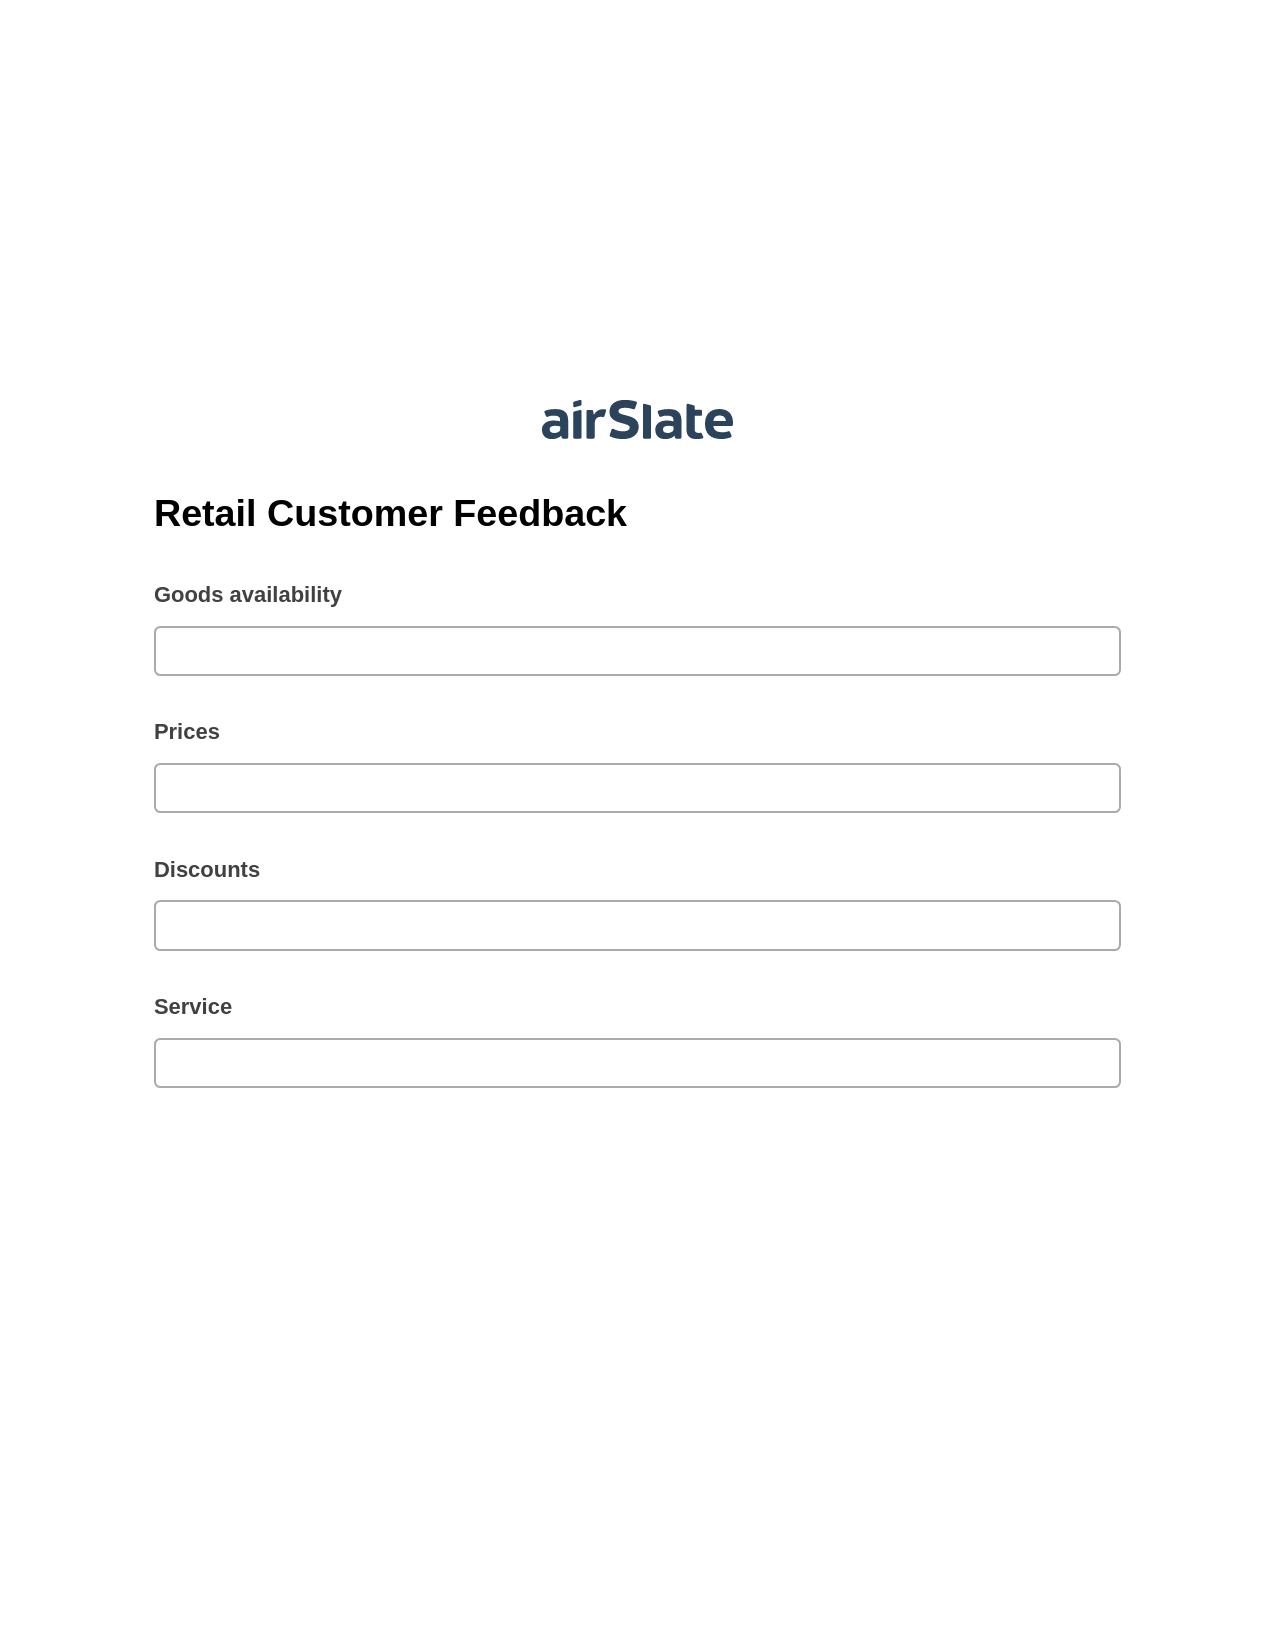 Retail Customer Feedback Pre-fill Dropdowns from CSV File Bot, Send Mailchimp Campaign Bot, Export to Excel 365 Bot